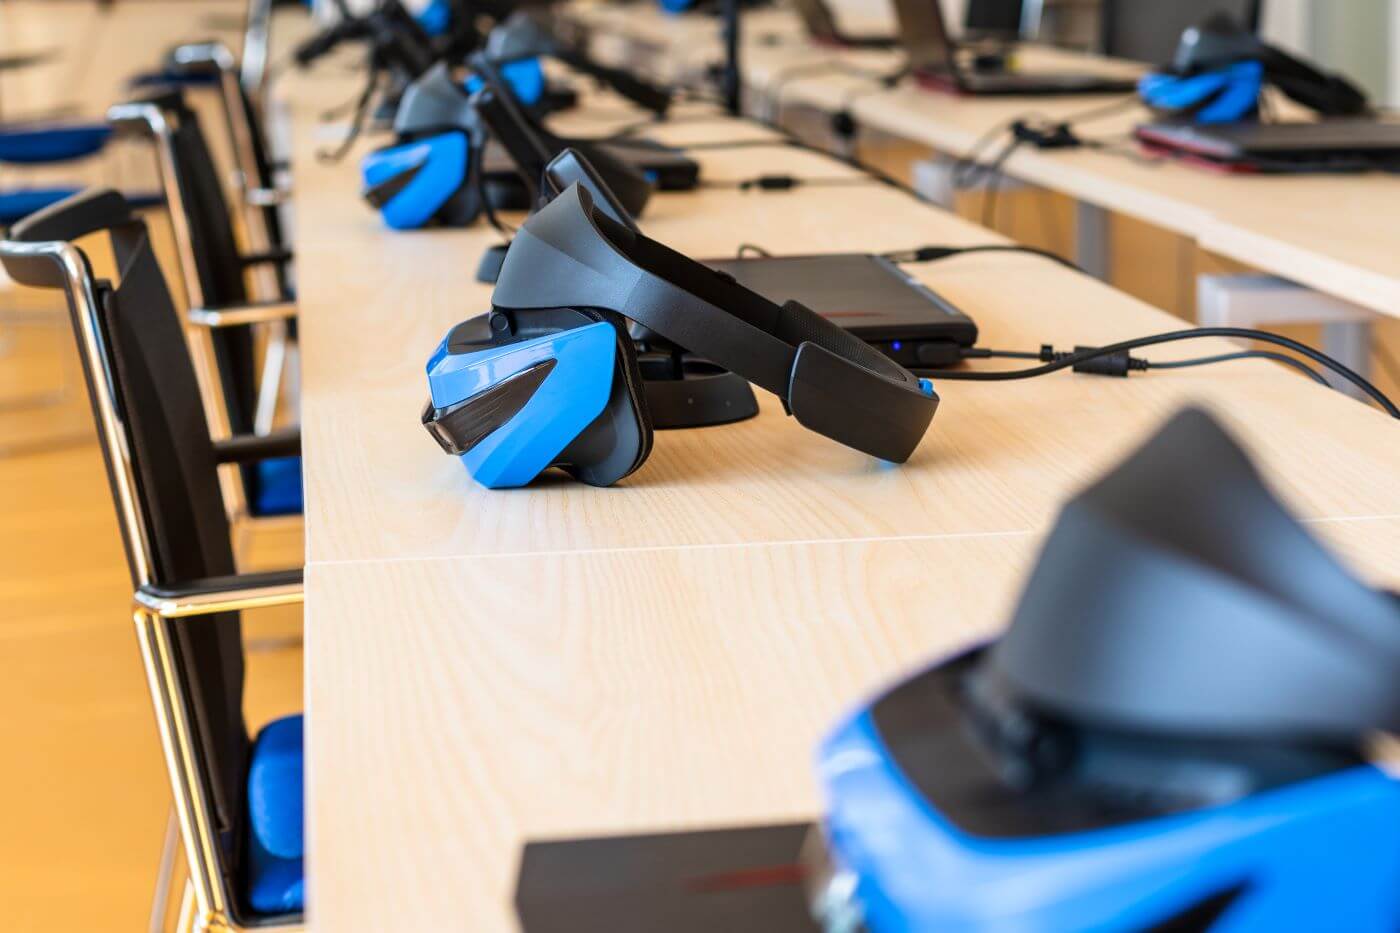 Close up of many VR headsets in a classroom